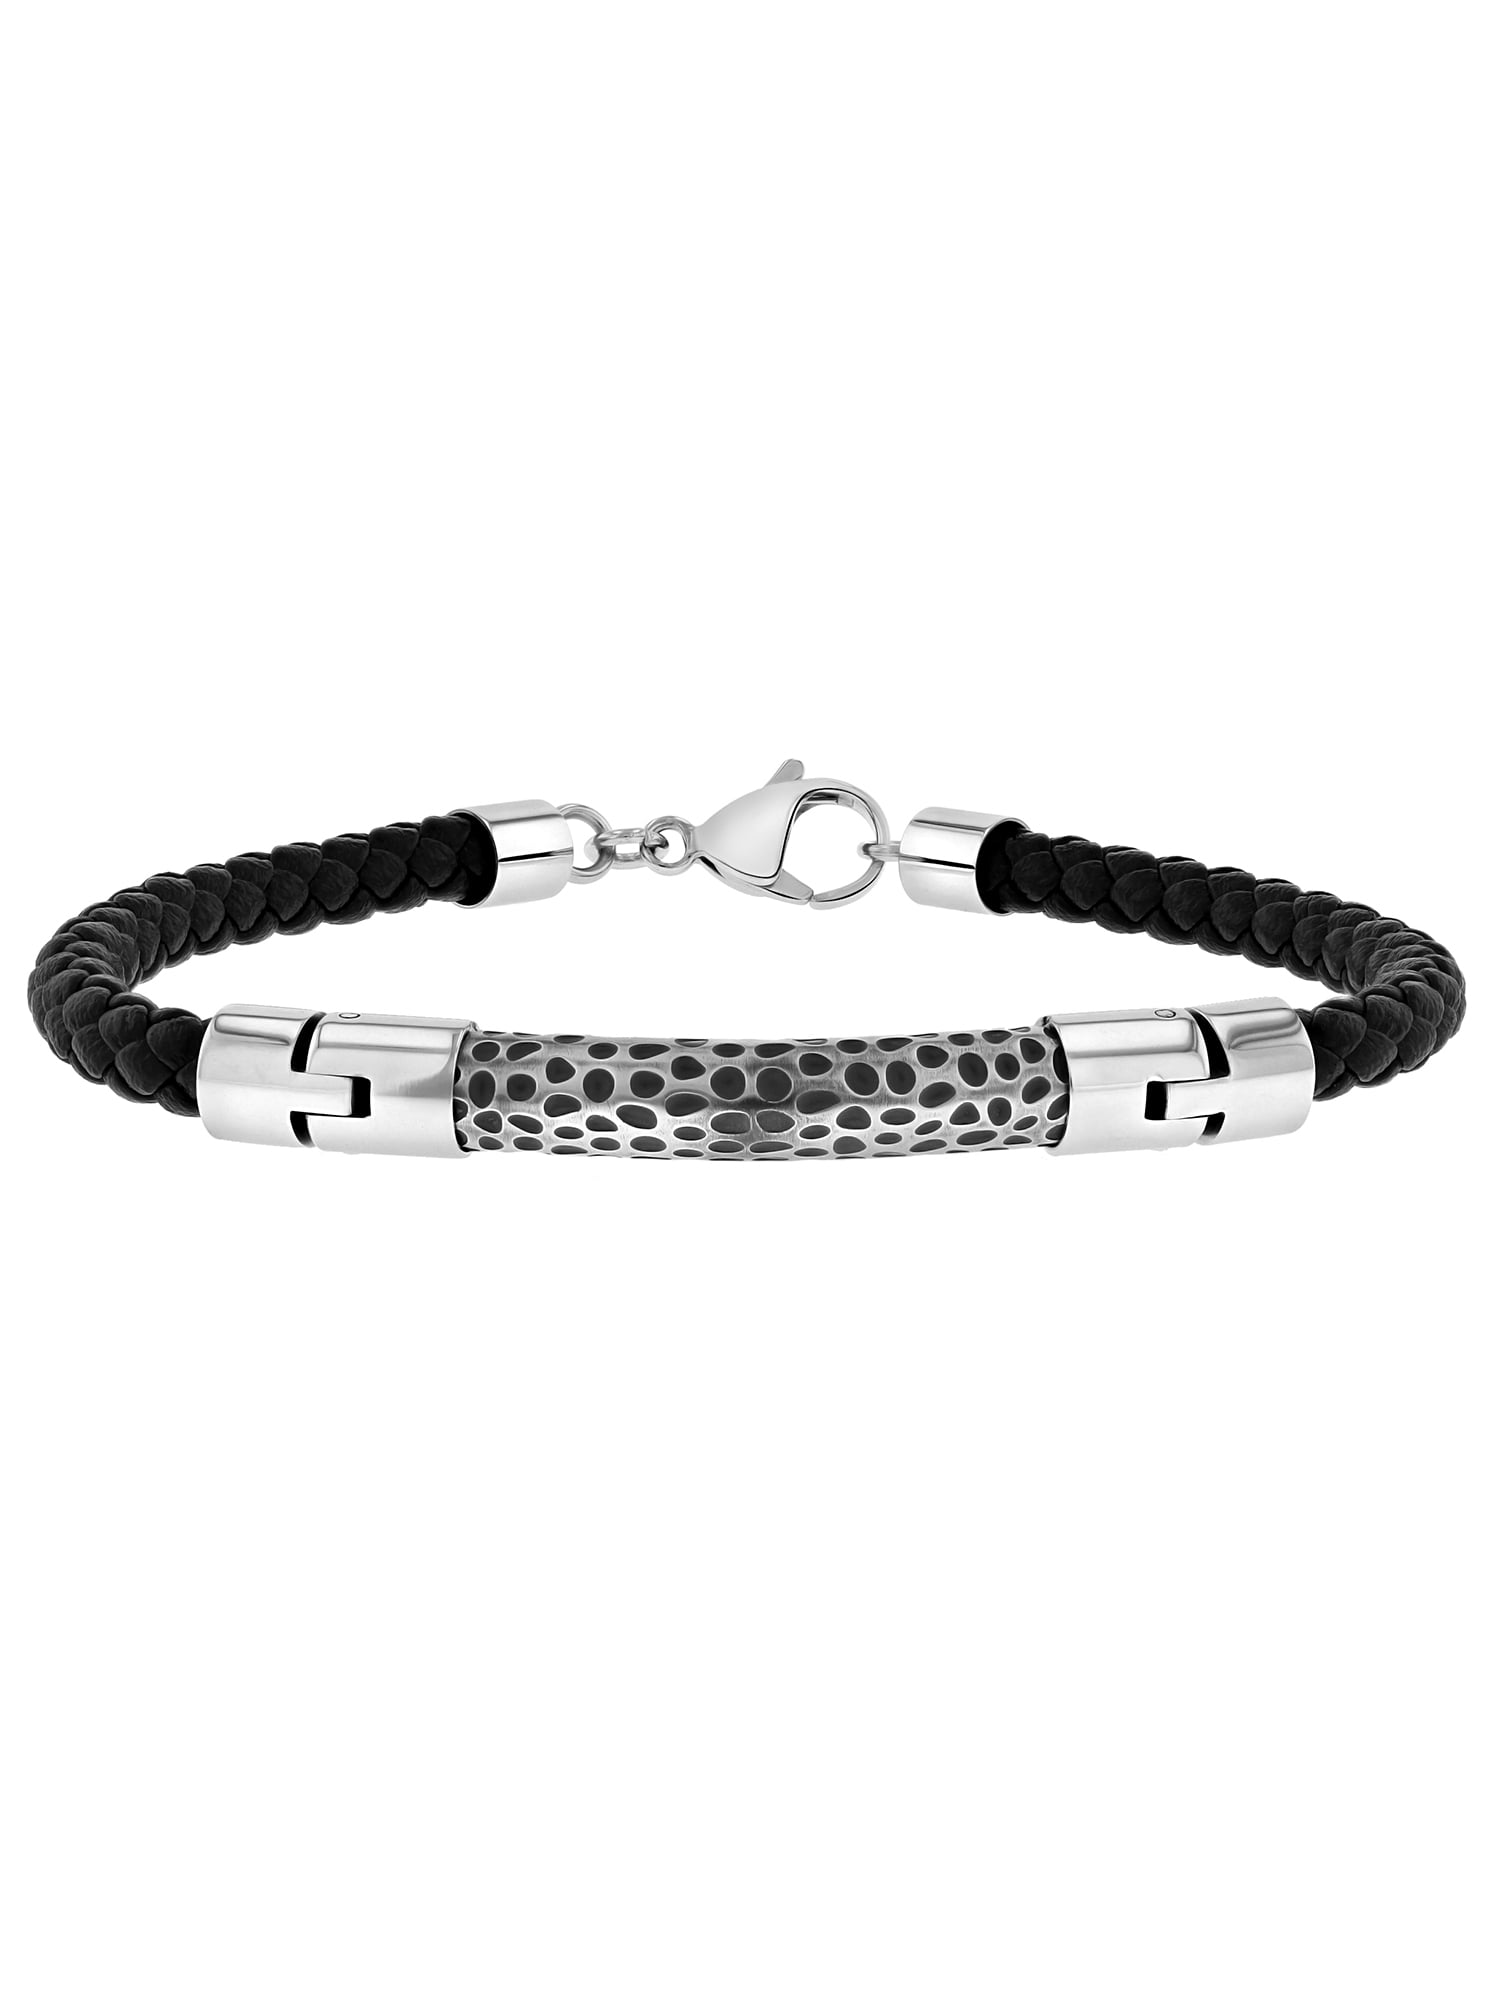 2 Pieces Magnetic Couples Bracelets Mutual Attraction Relationship Matching  Friendship Rope Bracelet - Walmart.com